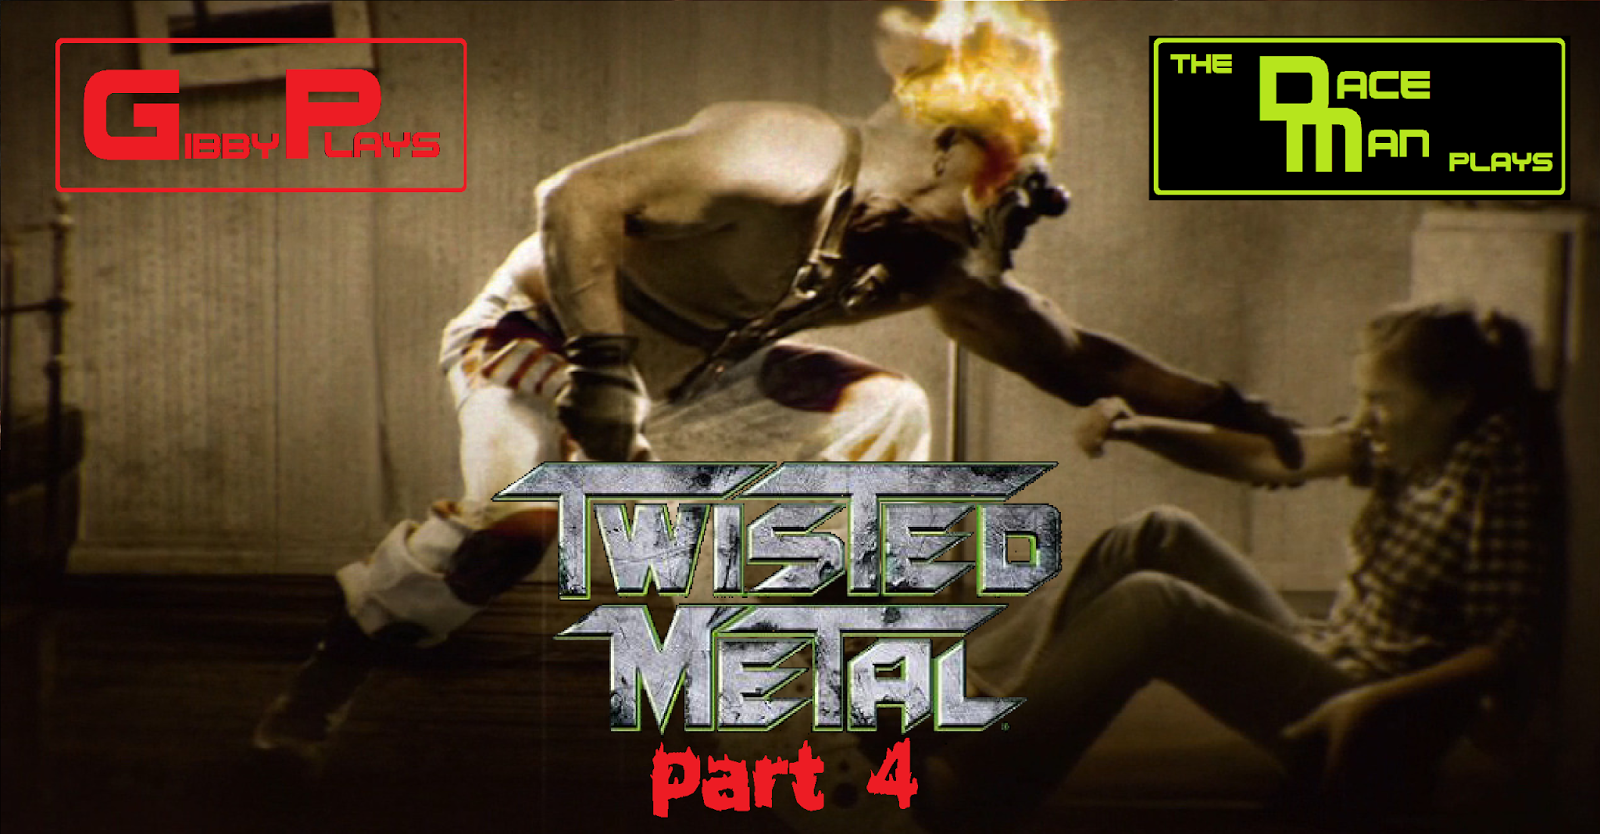  Twisted Metal PS3 : Video Games